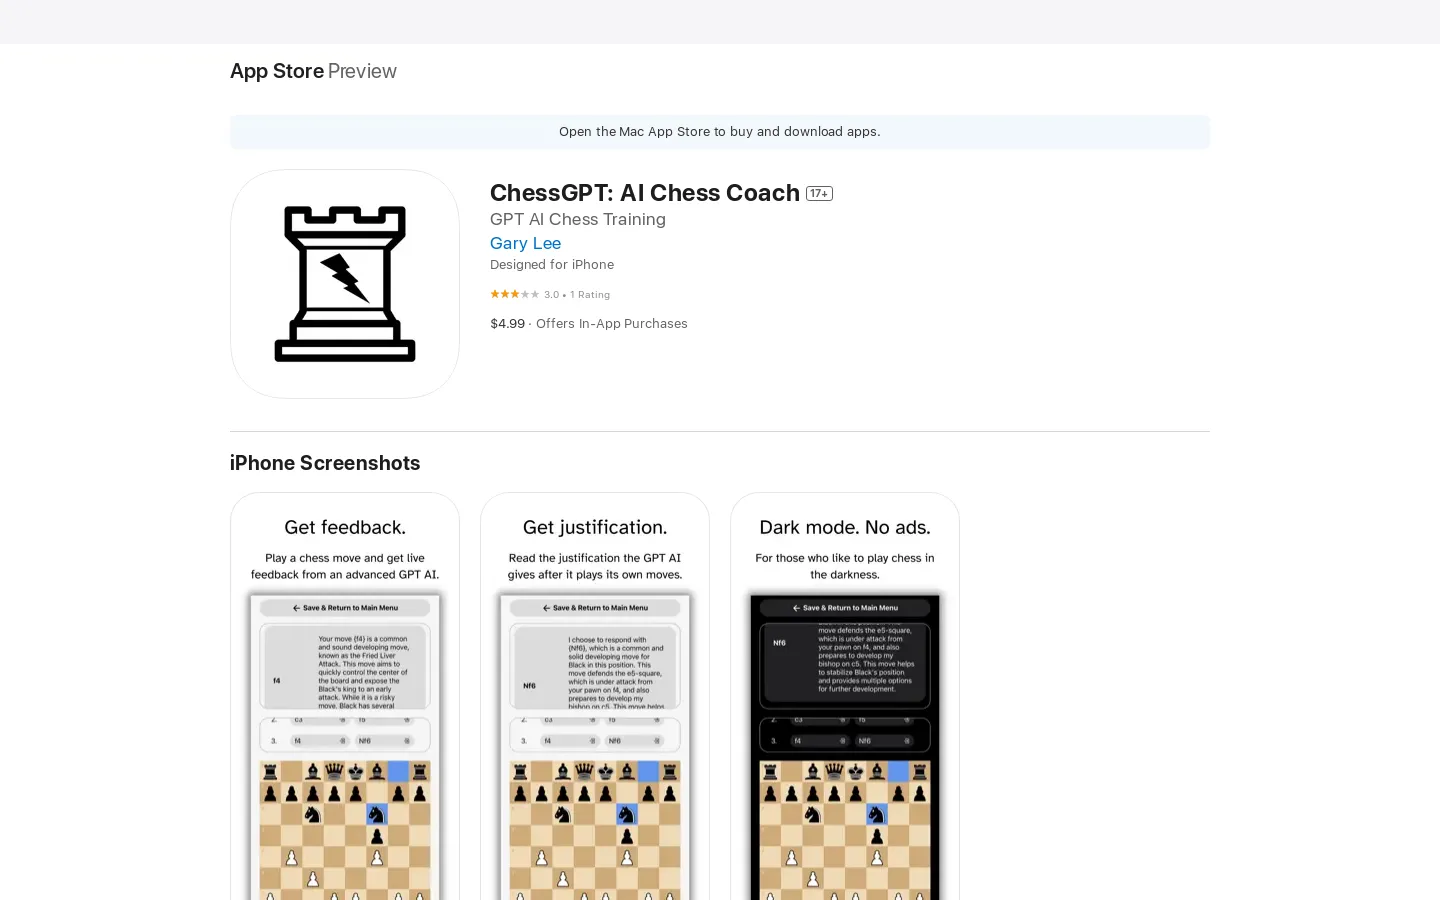 ChessGPT: AI Chess Coach on the App Store